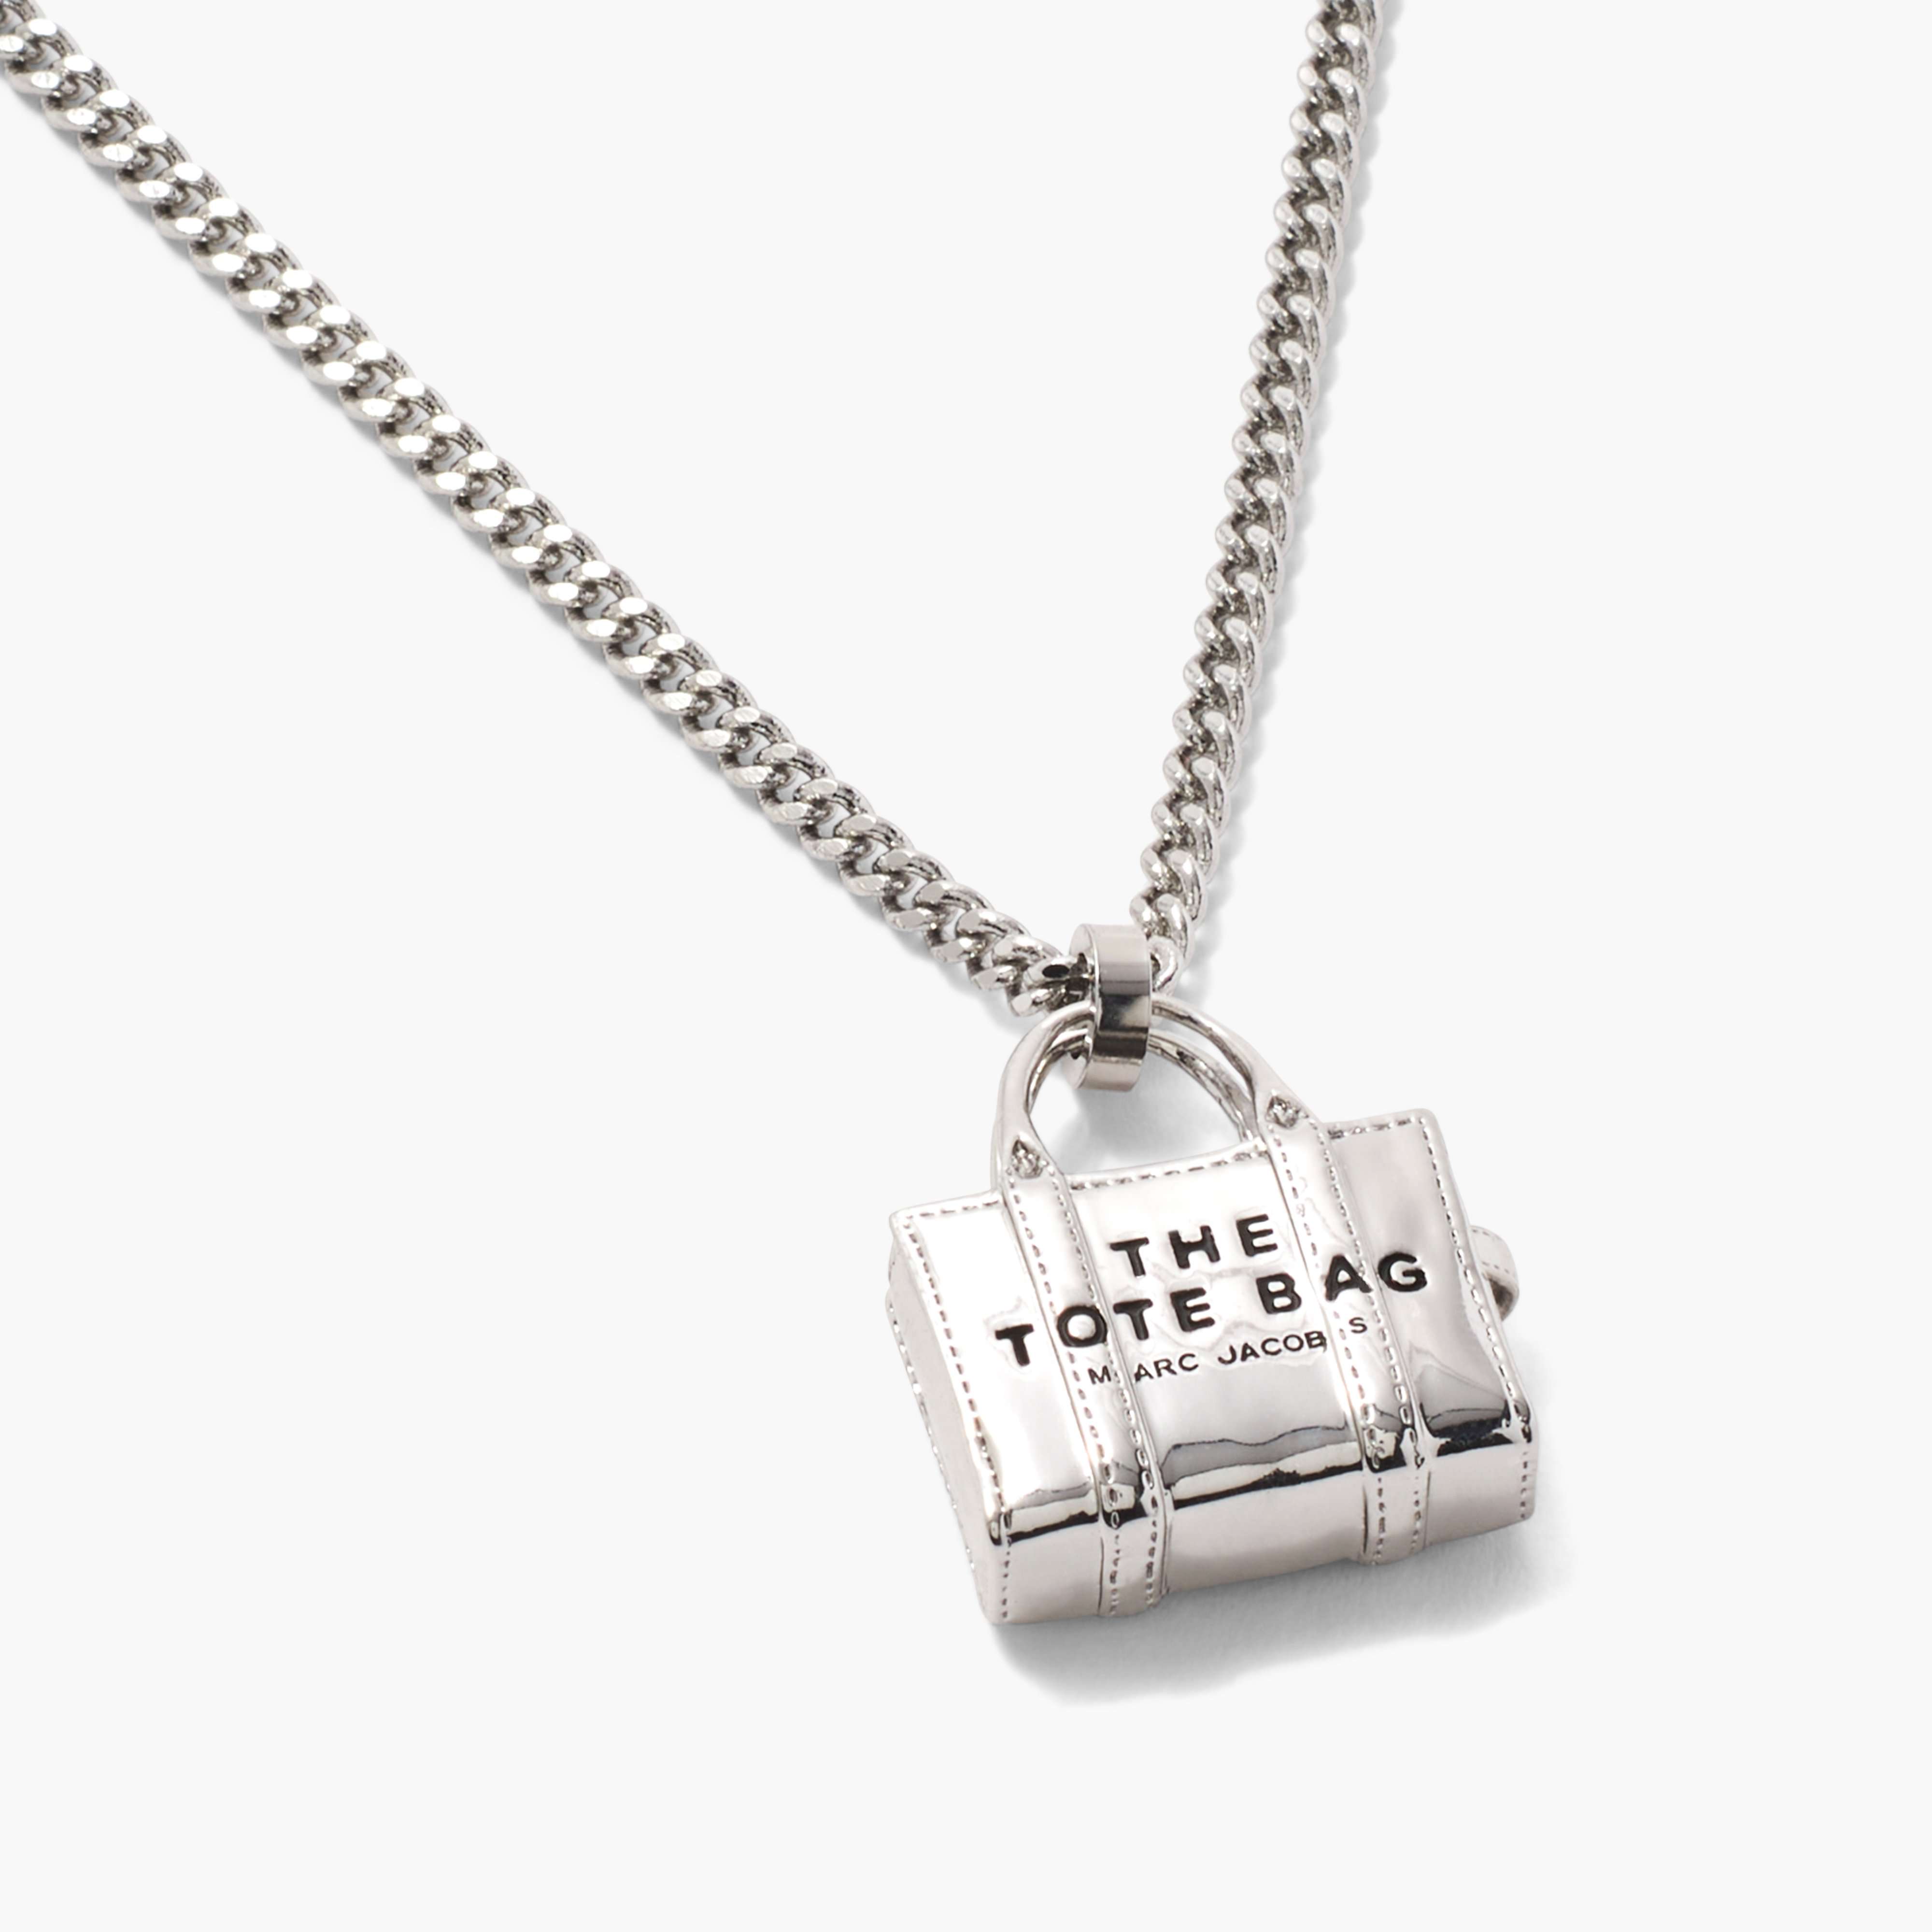 The Tote Bag Necklace in Light Antique Silver